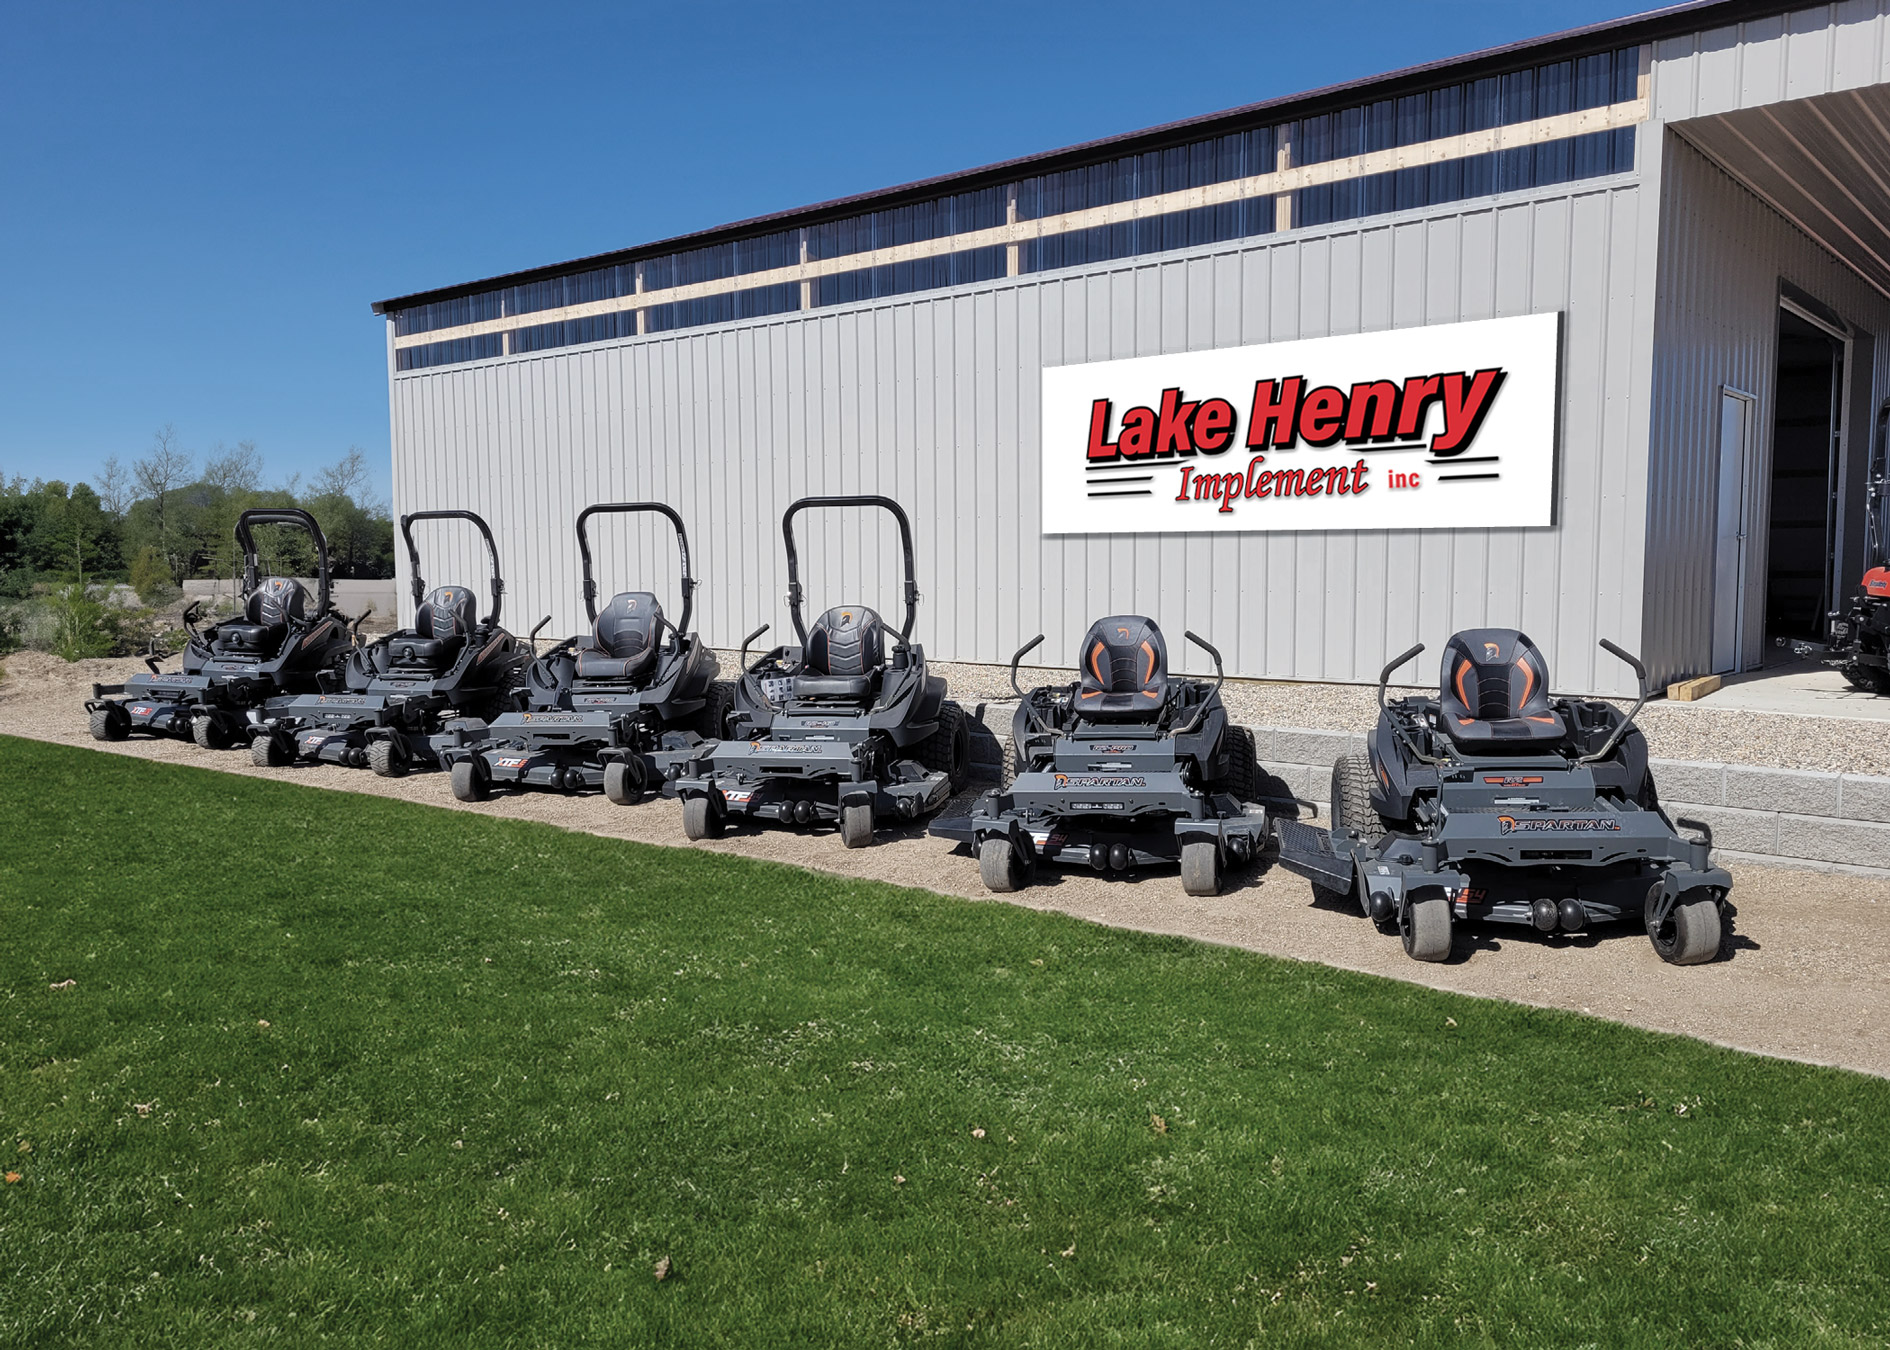 Lake Henry Implement, Inc